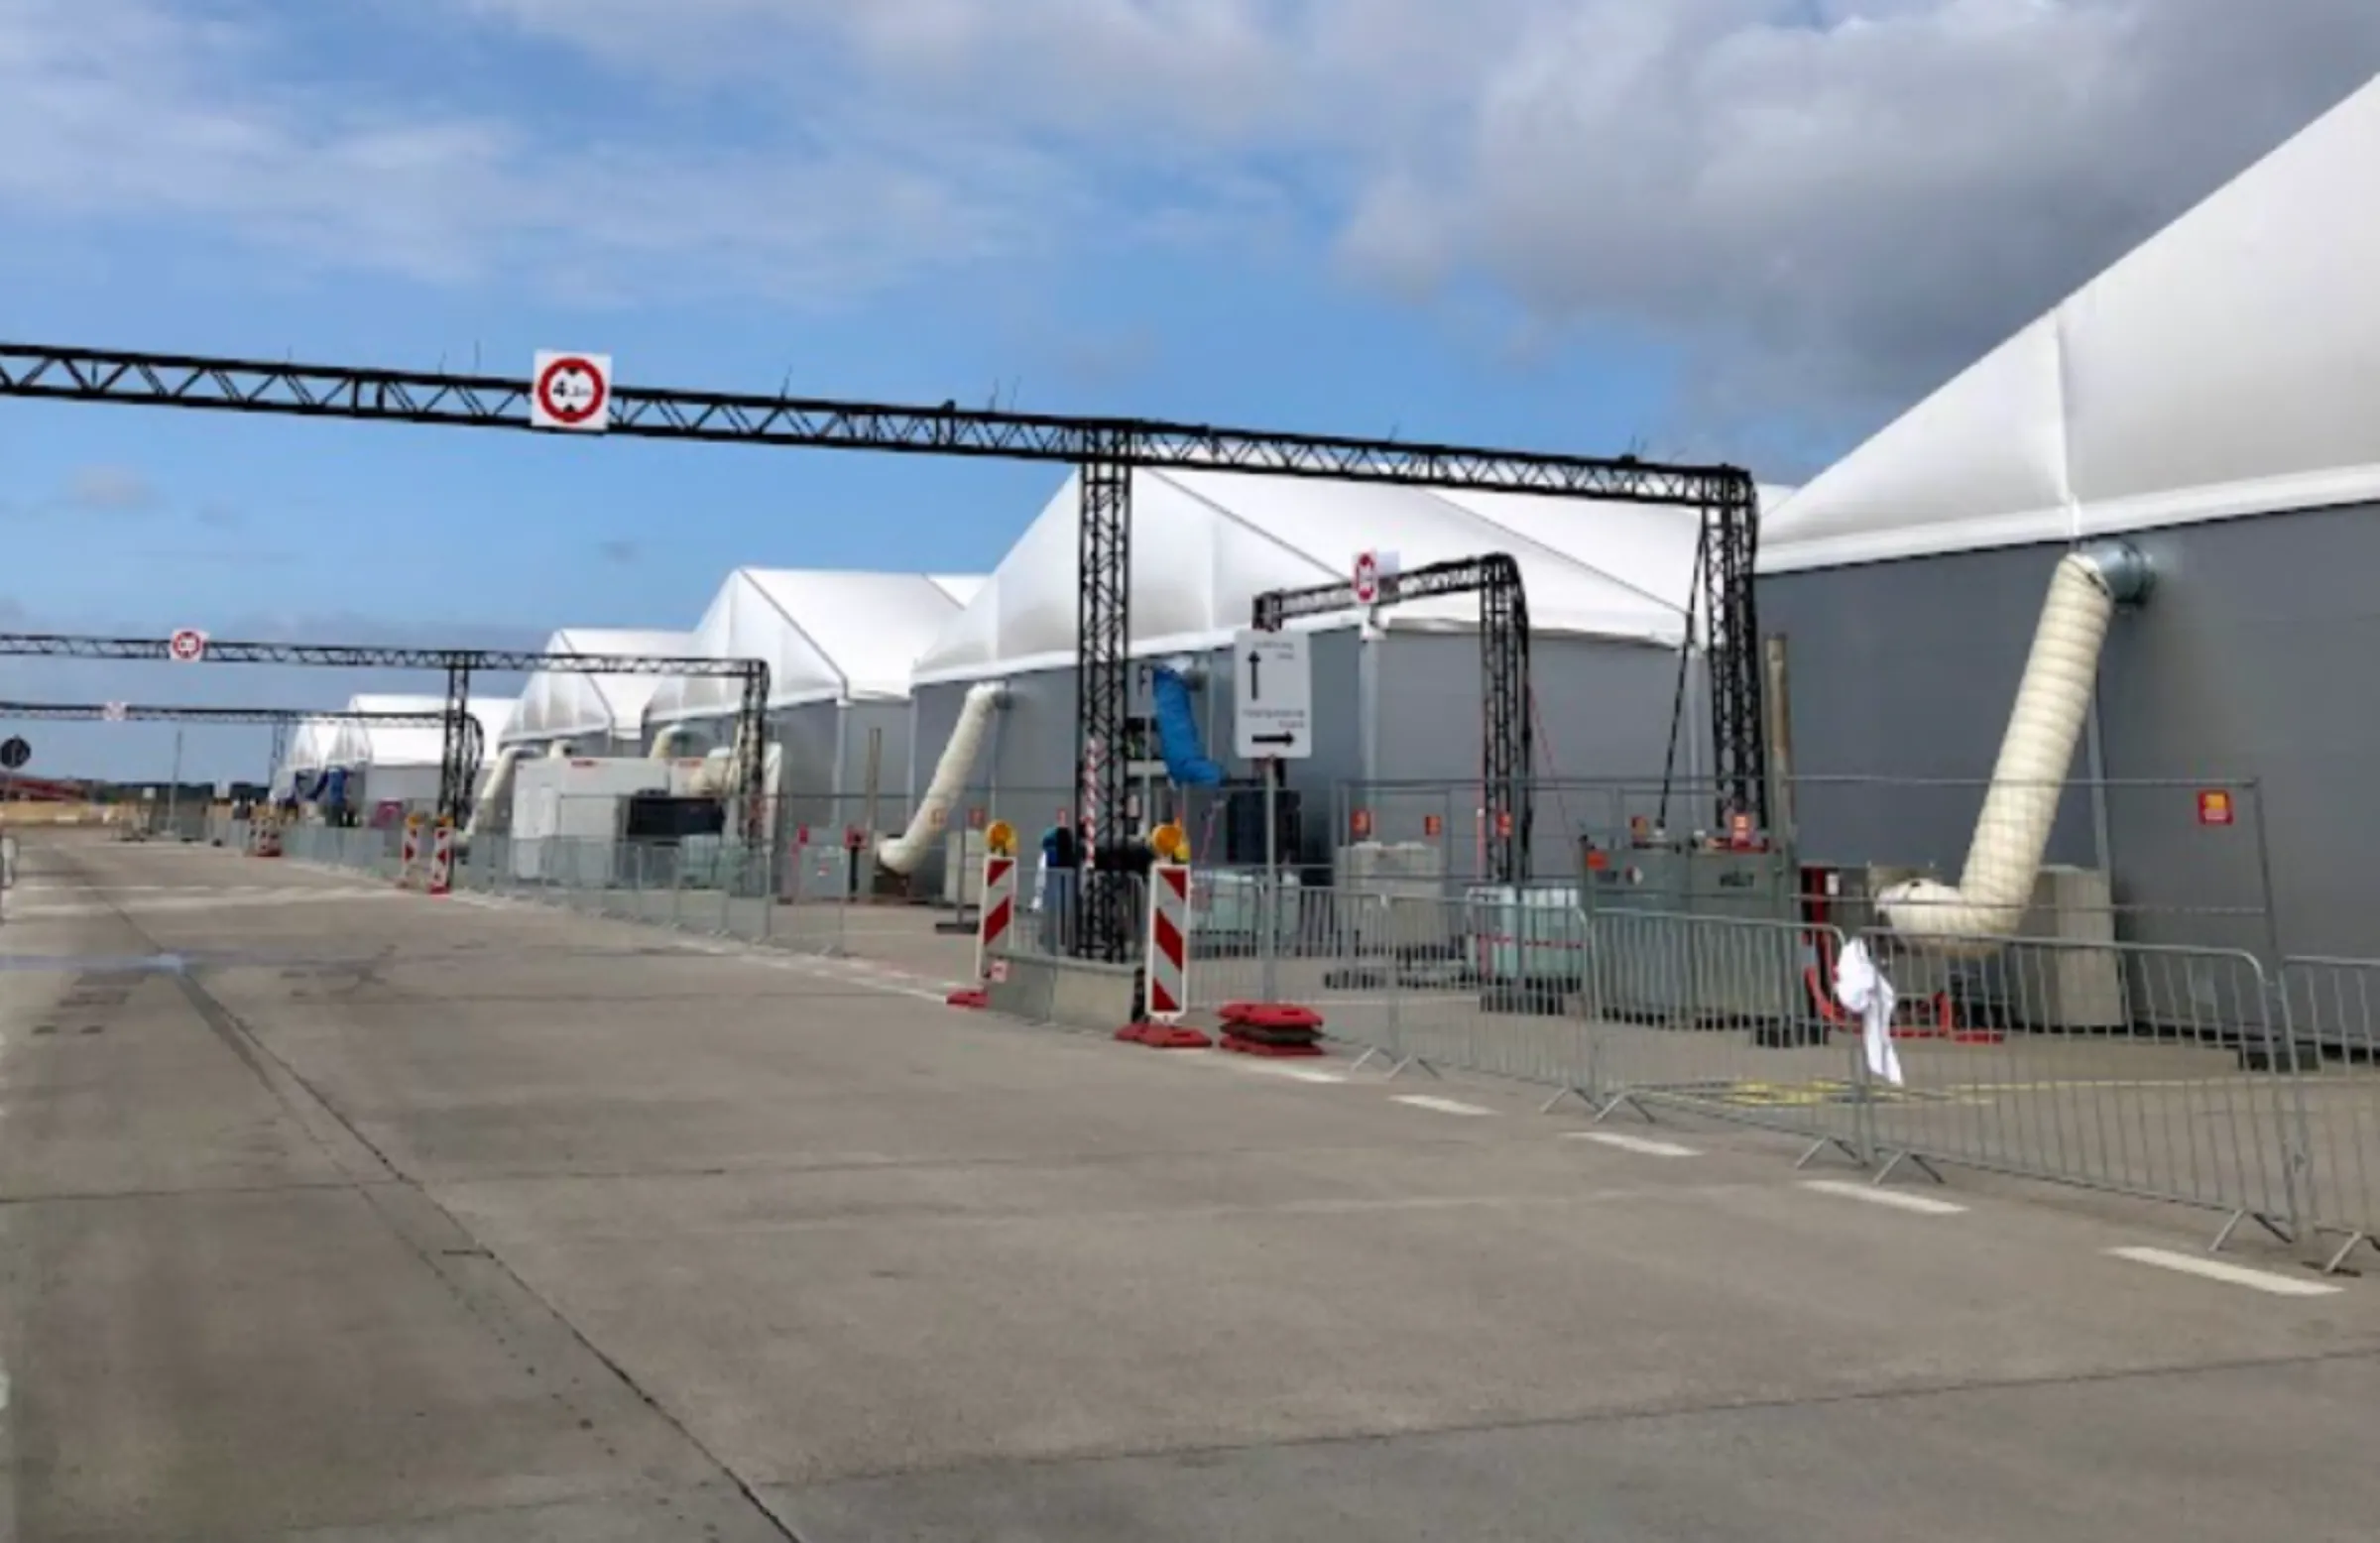 Authorities repurposed a former airport, Tegel, and built industrial marquees on site to accommodate thousands of Ukrainian refugees arriving daily last year in Berlin, Germany. April 25, 2023